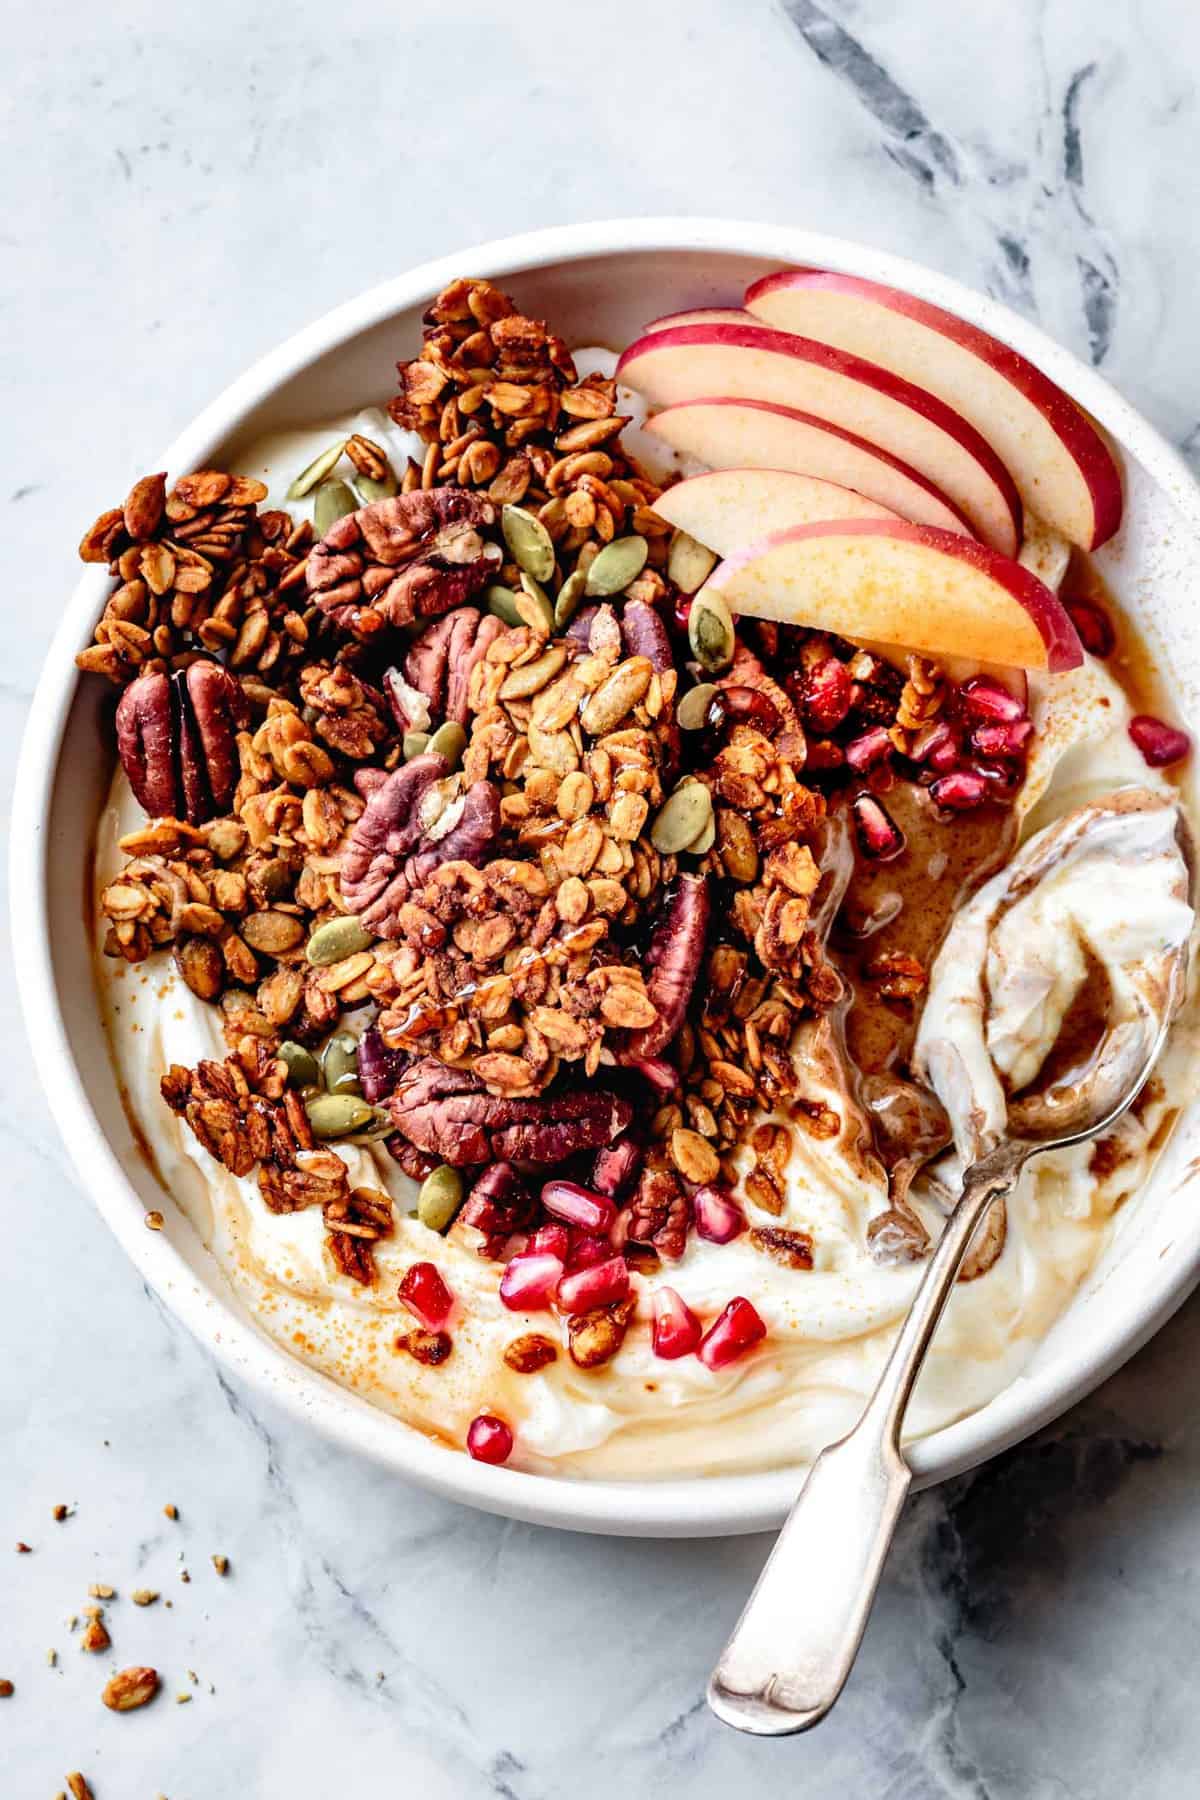 pumpkin granola in a bowl with sliced apples, pomegranate, yogurt, and nut butter on gray marble